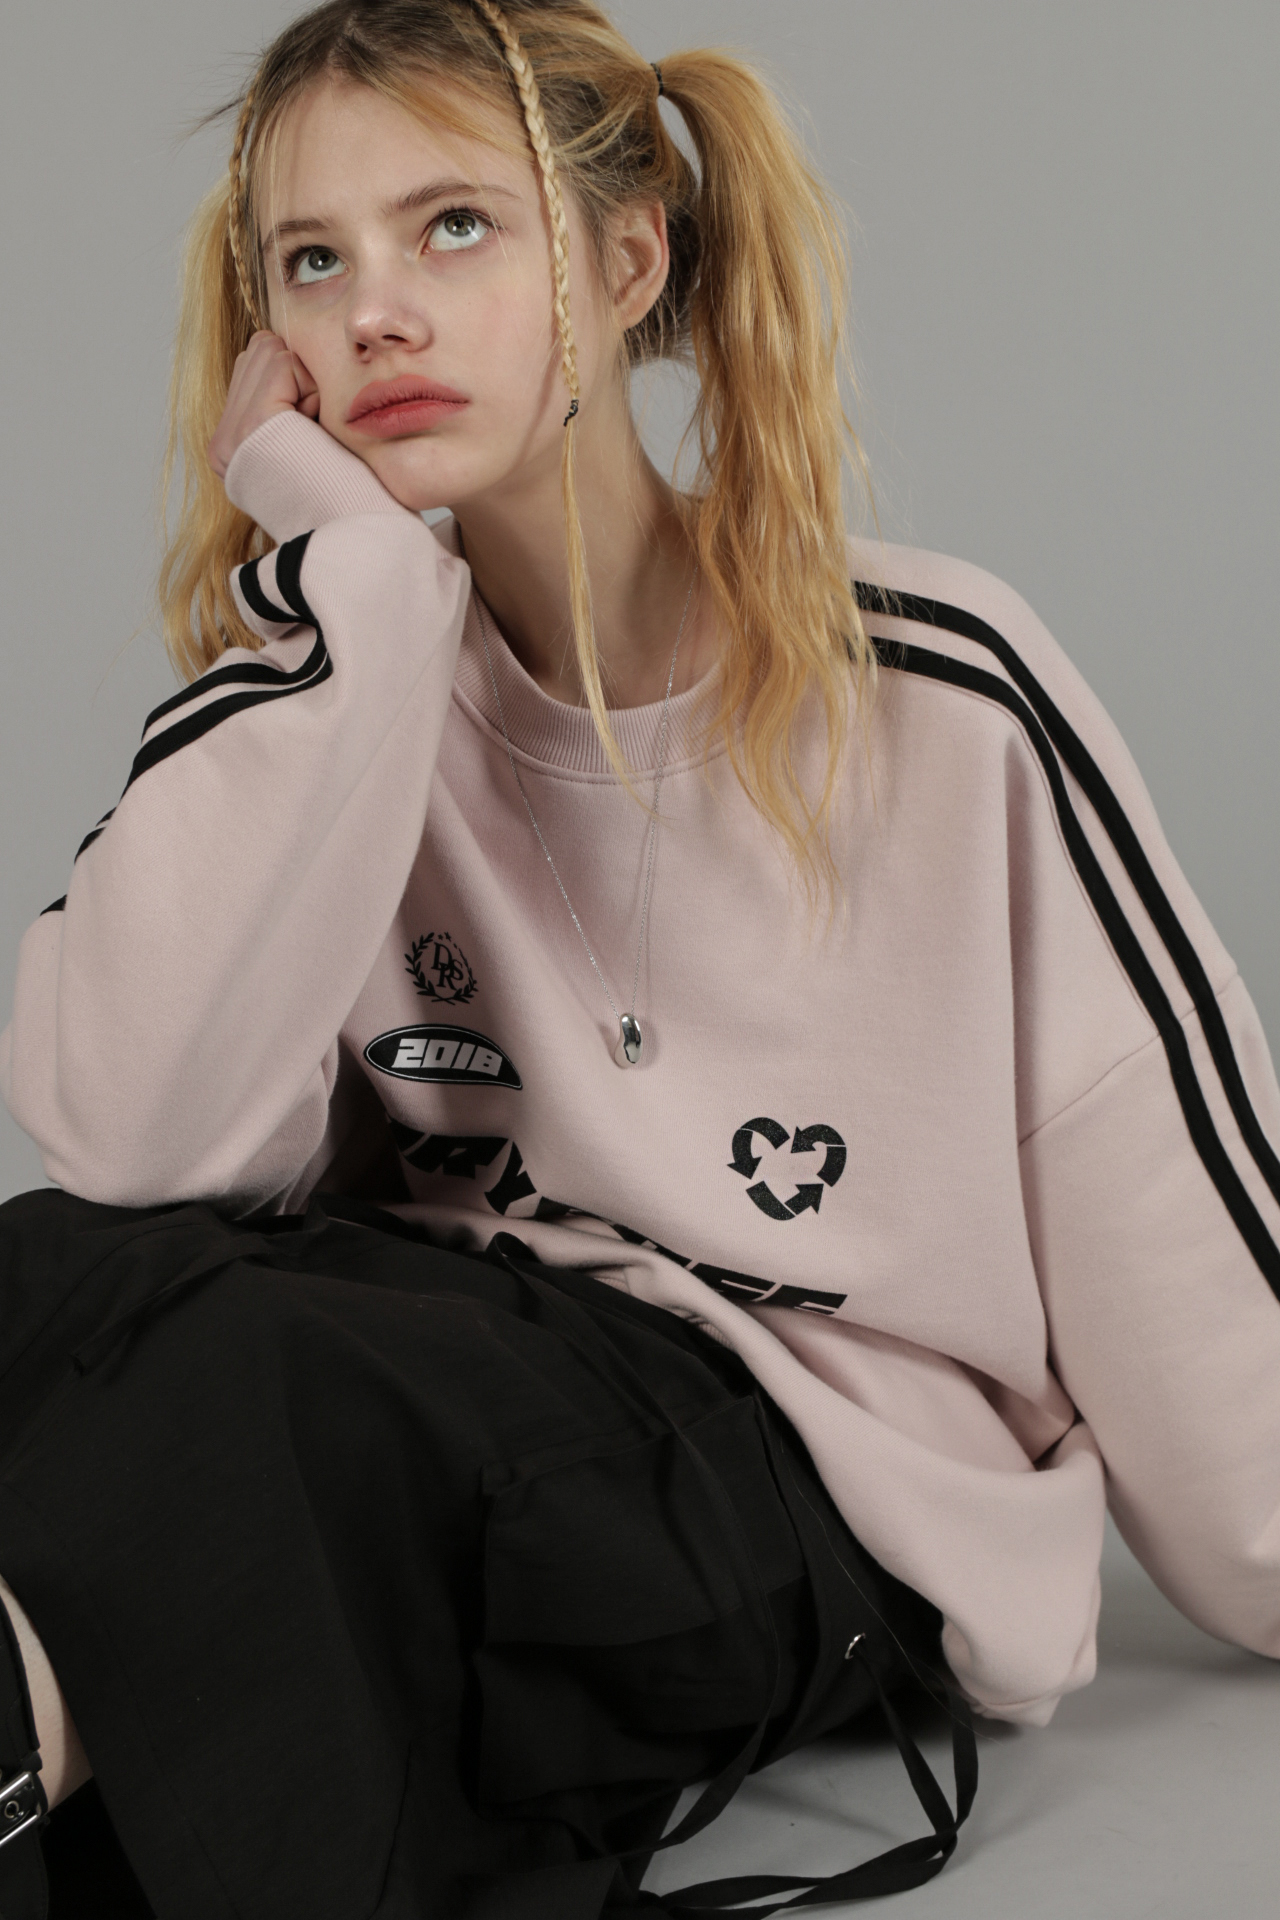 [2nd Pre-order] SIGNATURE LOGO SWEATSHIRTS (PINK) 4/12 이후 순차발송